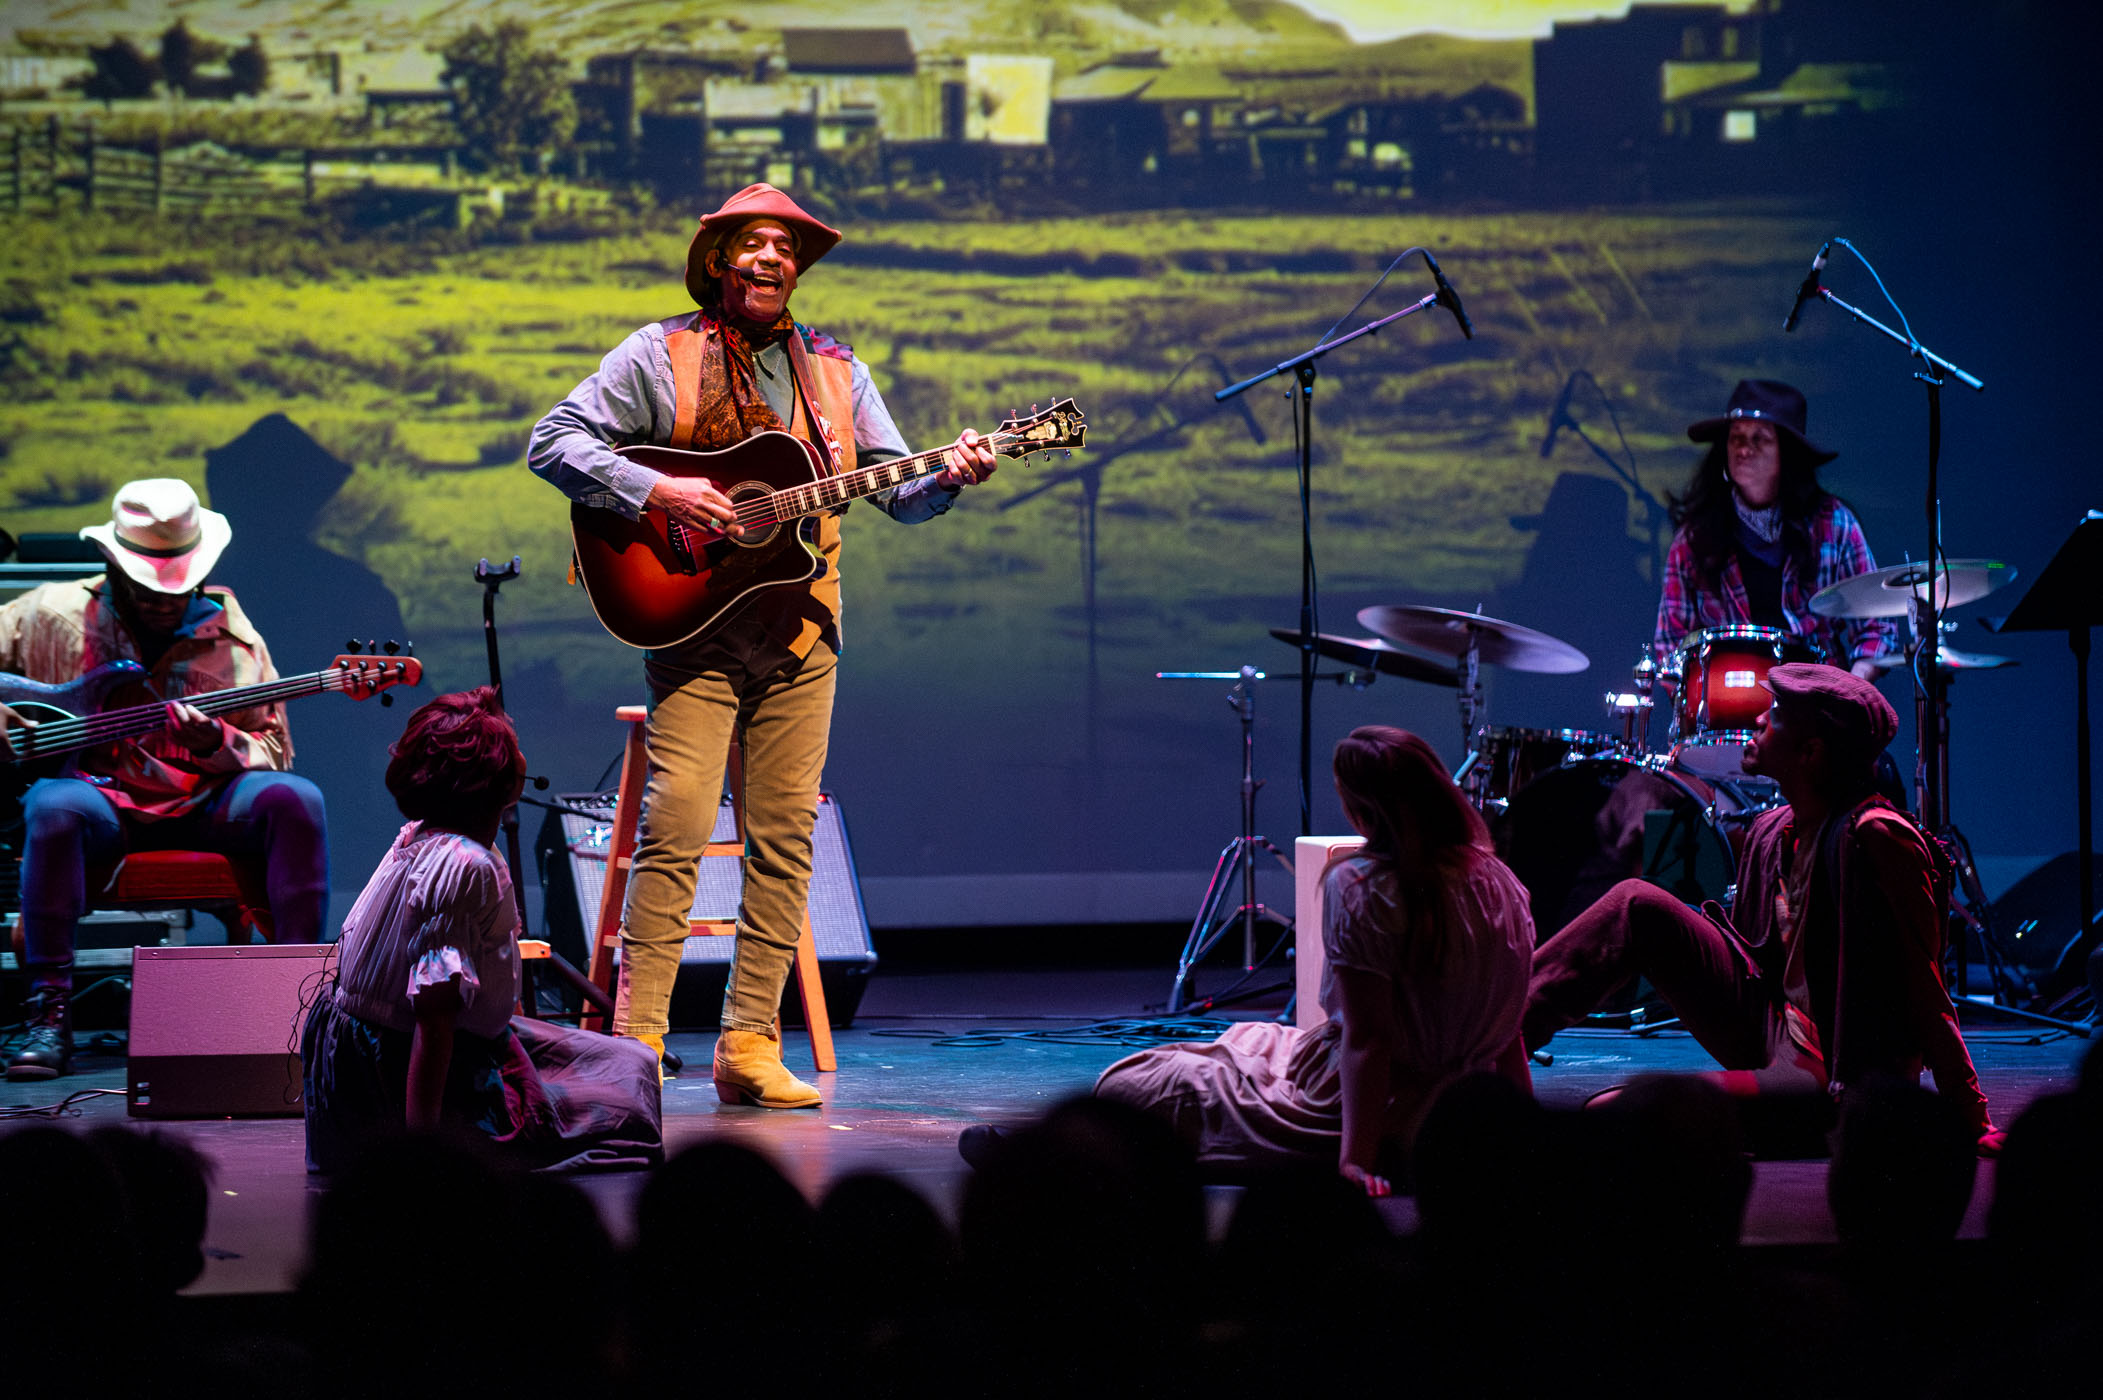 This week during Black History Month, 爱爱直播鈥檚 Lyceum Series presented 鈥淐ross that River,鈥� the country rock-inspired musical story honoring America鈥檚 first Black cowboys. A large Bettersworth Auditorium audience watched and listened to the story of Blue, a courageous runaway slave who finds refuge and fresh aspirations in Texas, becoming one of the nation&#039;s pioneering Black cowboys. Another Lyceum performance this month is Hiplet Ballerinas, who appeared on the TV show 鈥淎merican鈥檚 Got Talent,鈥� on Feb. 29, 7 p.